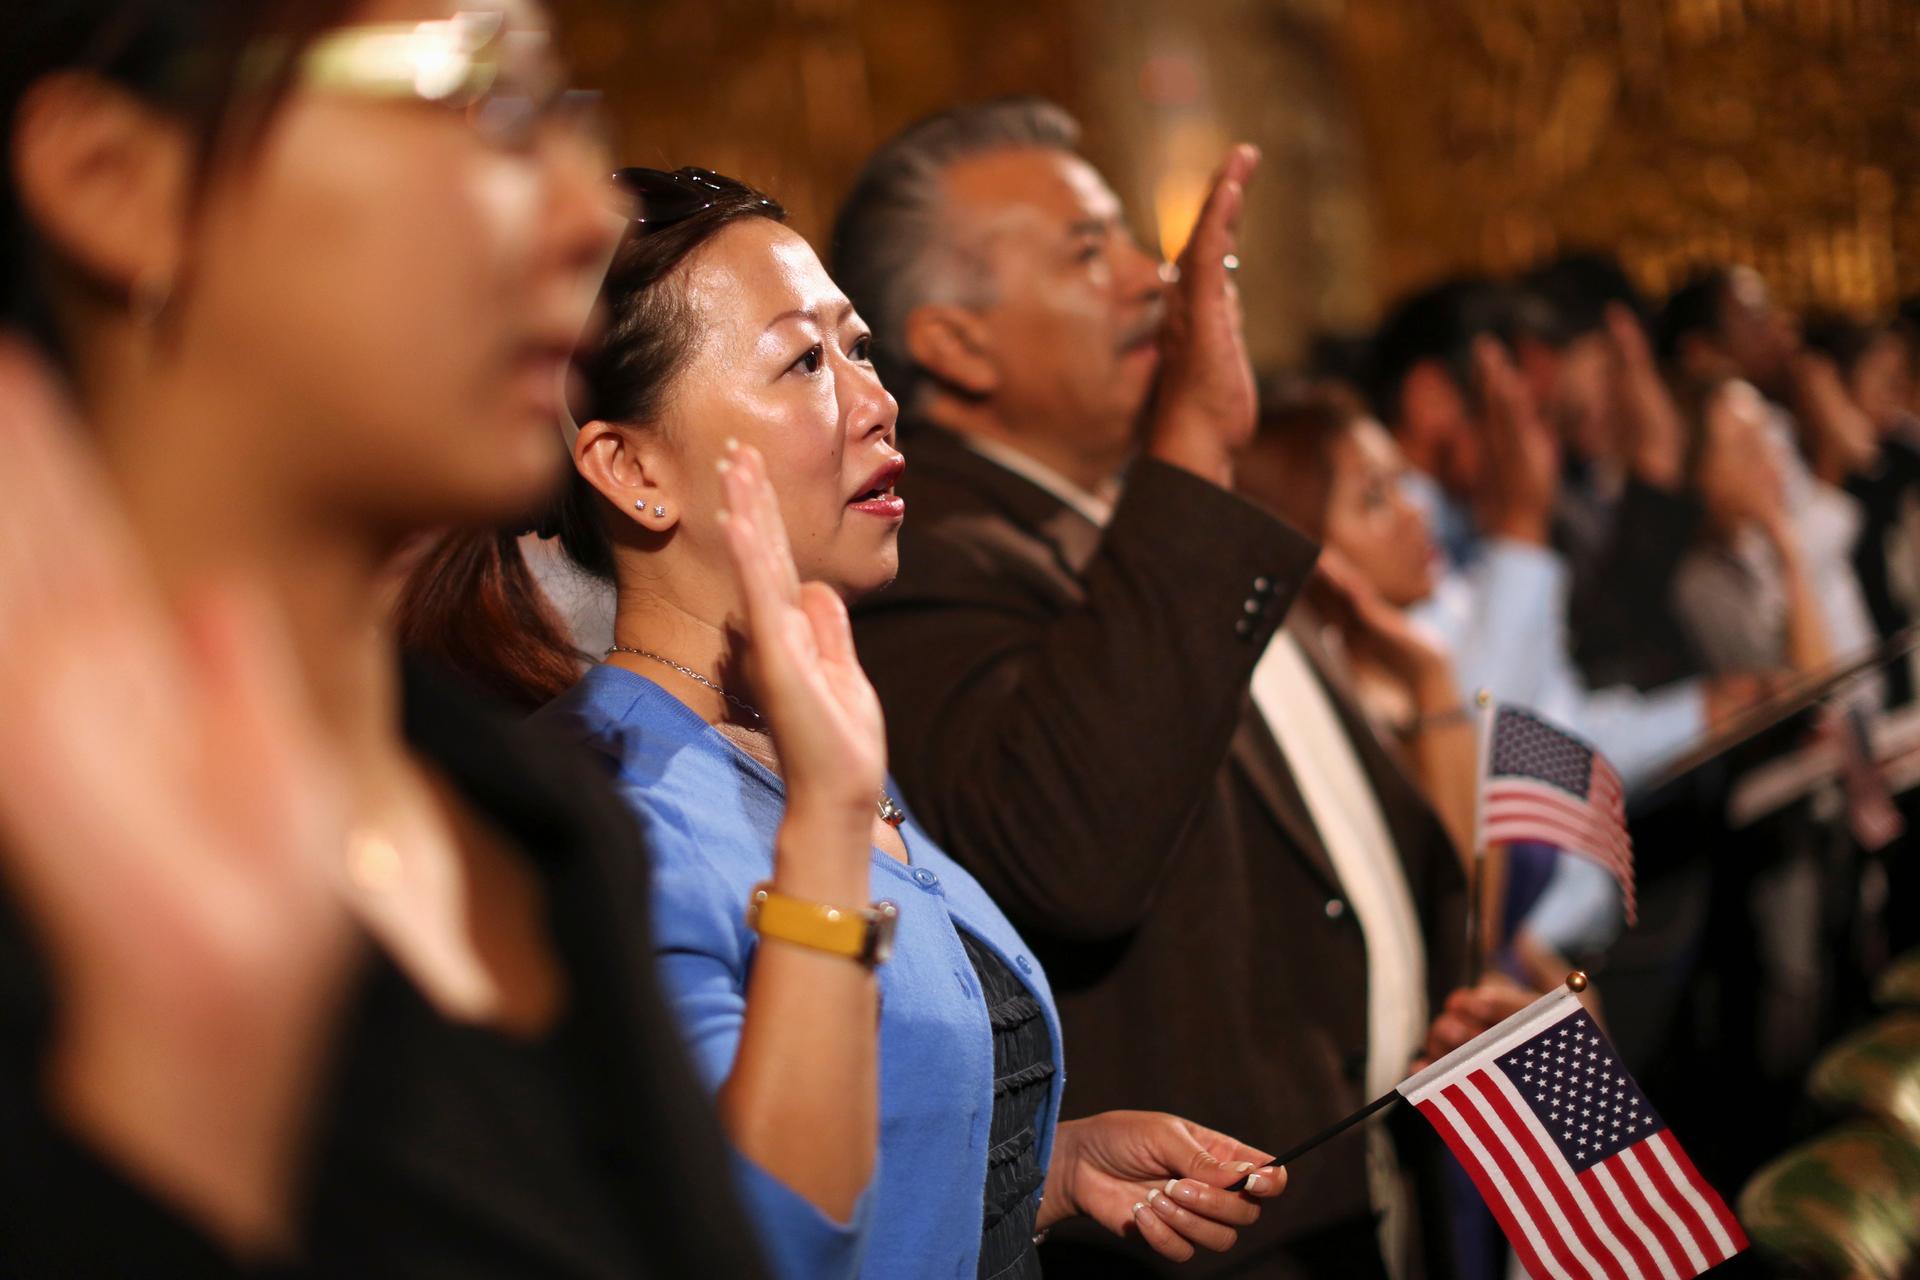 New citizens are naturalized during a ceremony in Oakland, California, on August 13, 2013. 